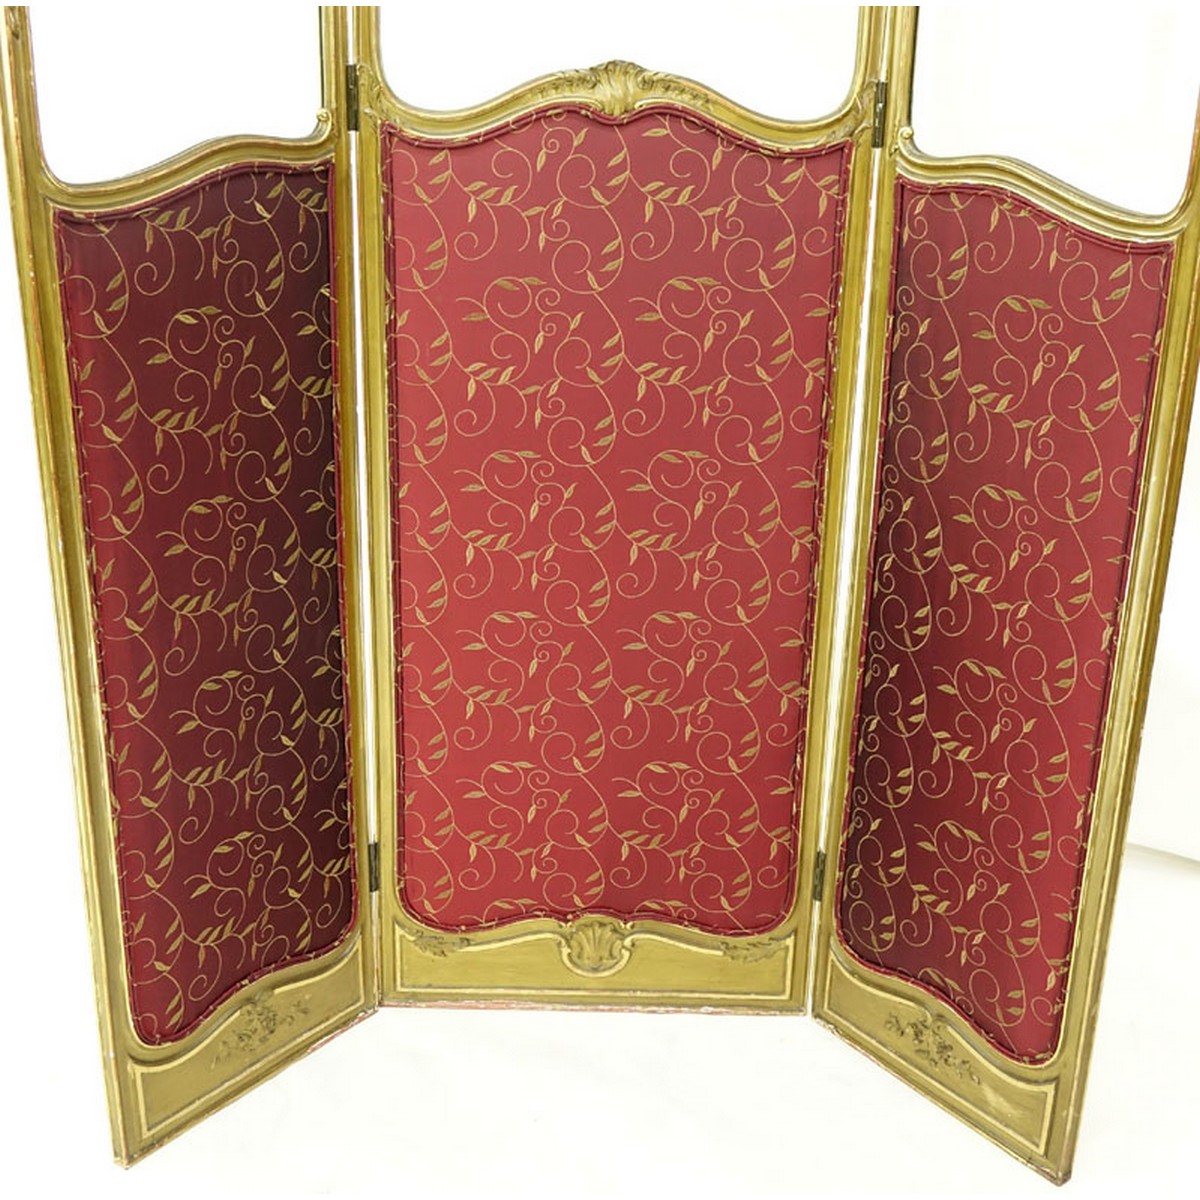 20th Century Louis XVI Style French Giltwood Carved and Silk Upholstered Three Panel Screen. Scratches to wood and rubbing to gilt, small loss to finial.